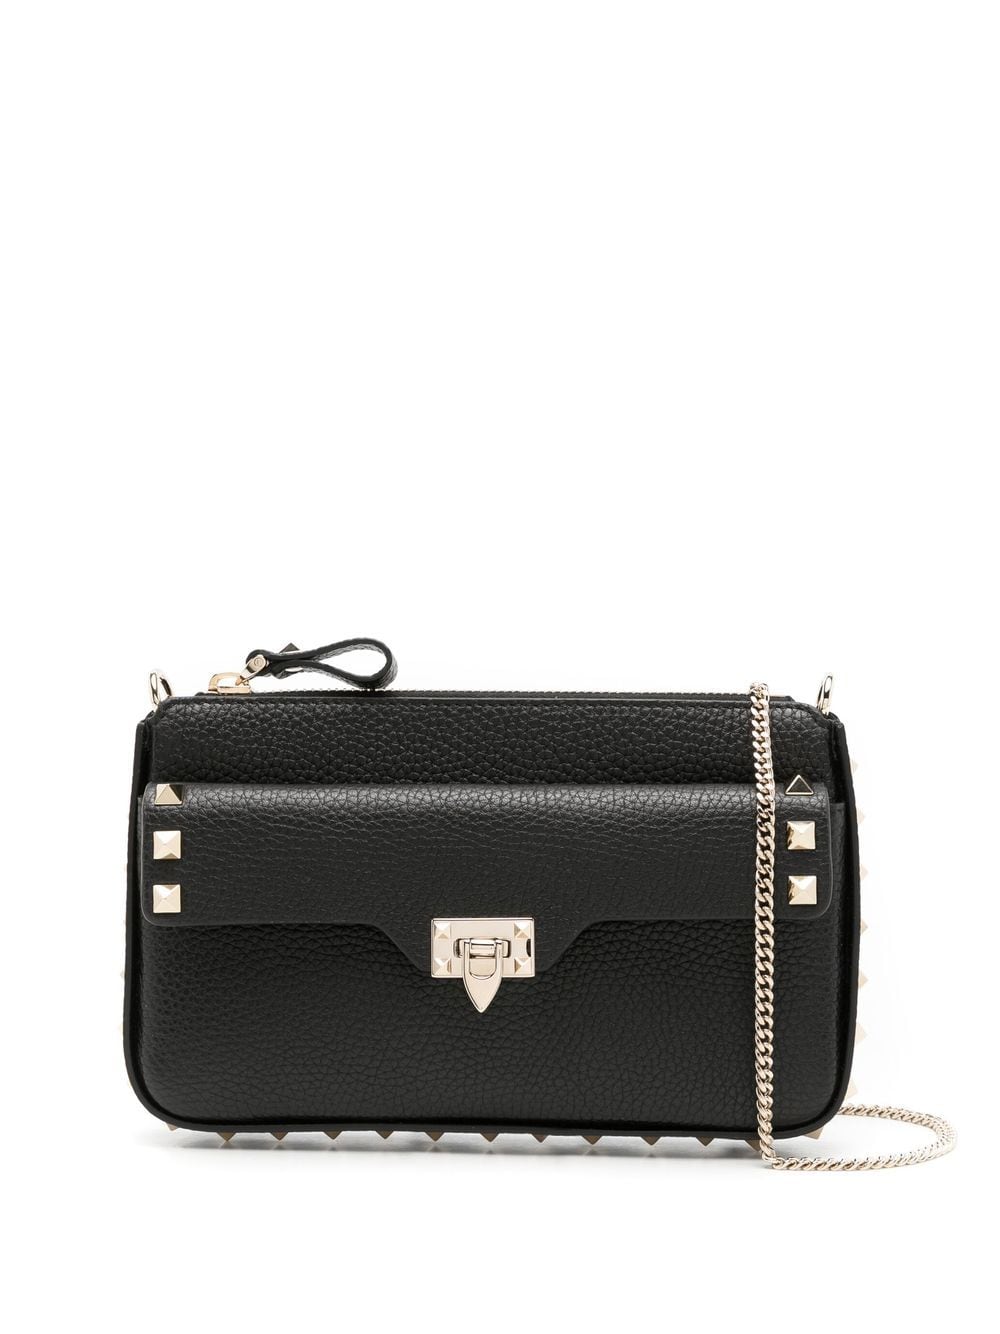 VALENTINO Elegant Black Pouch Handbag with Gold Accents for Women